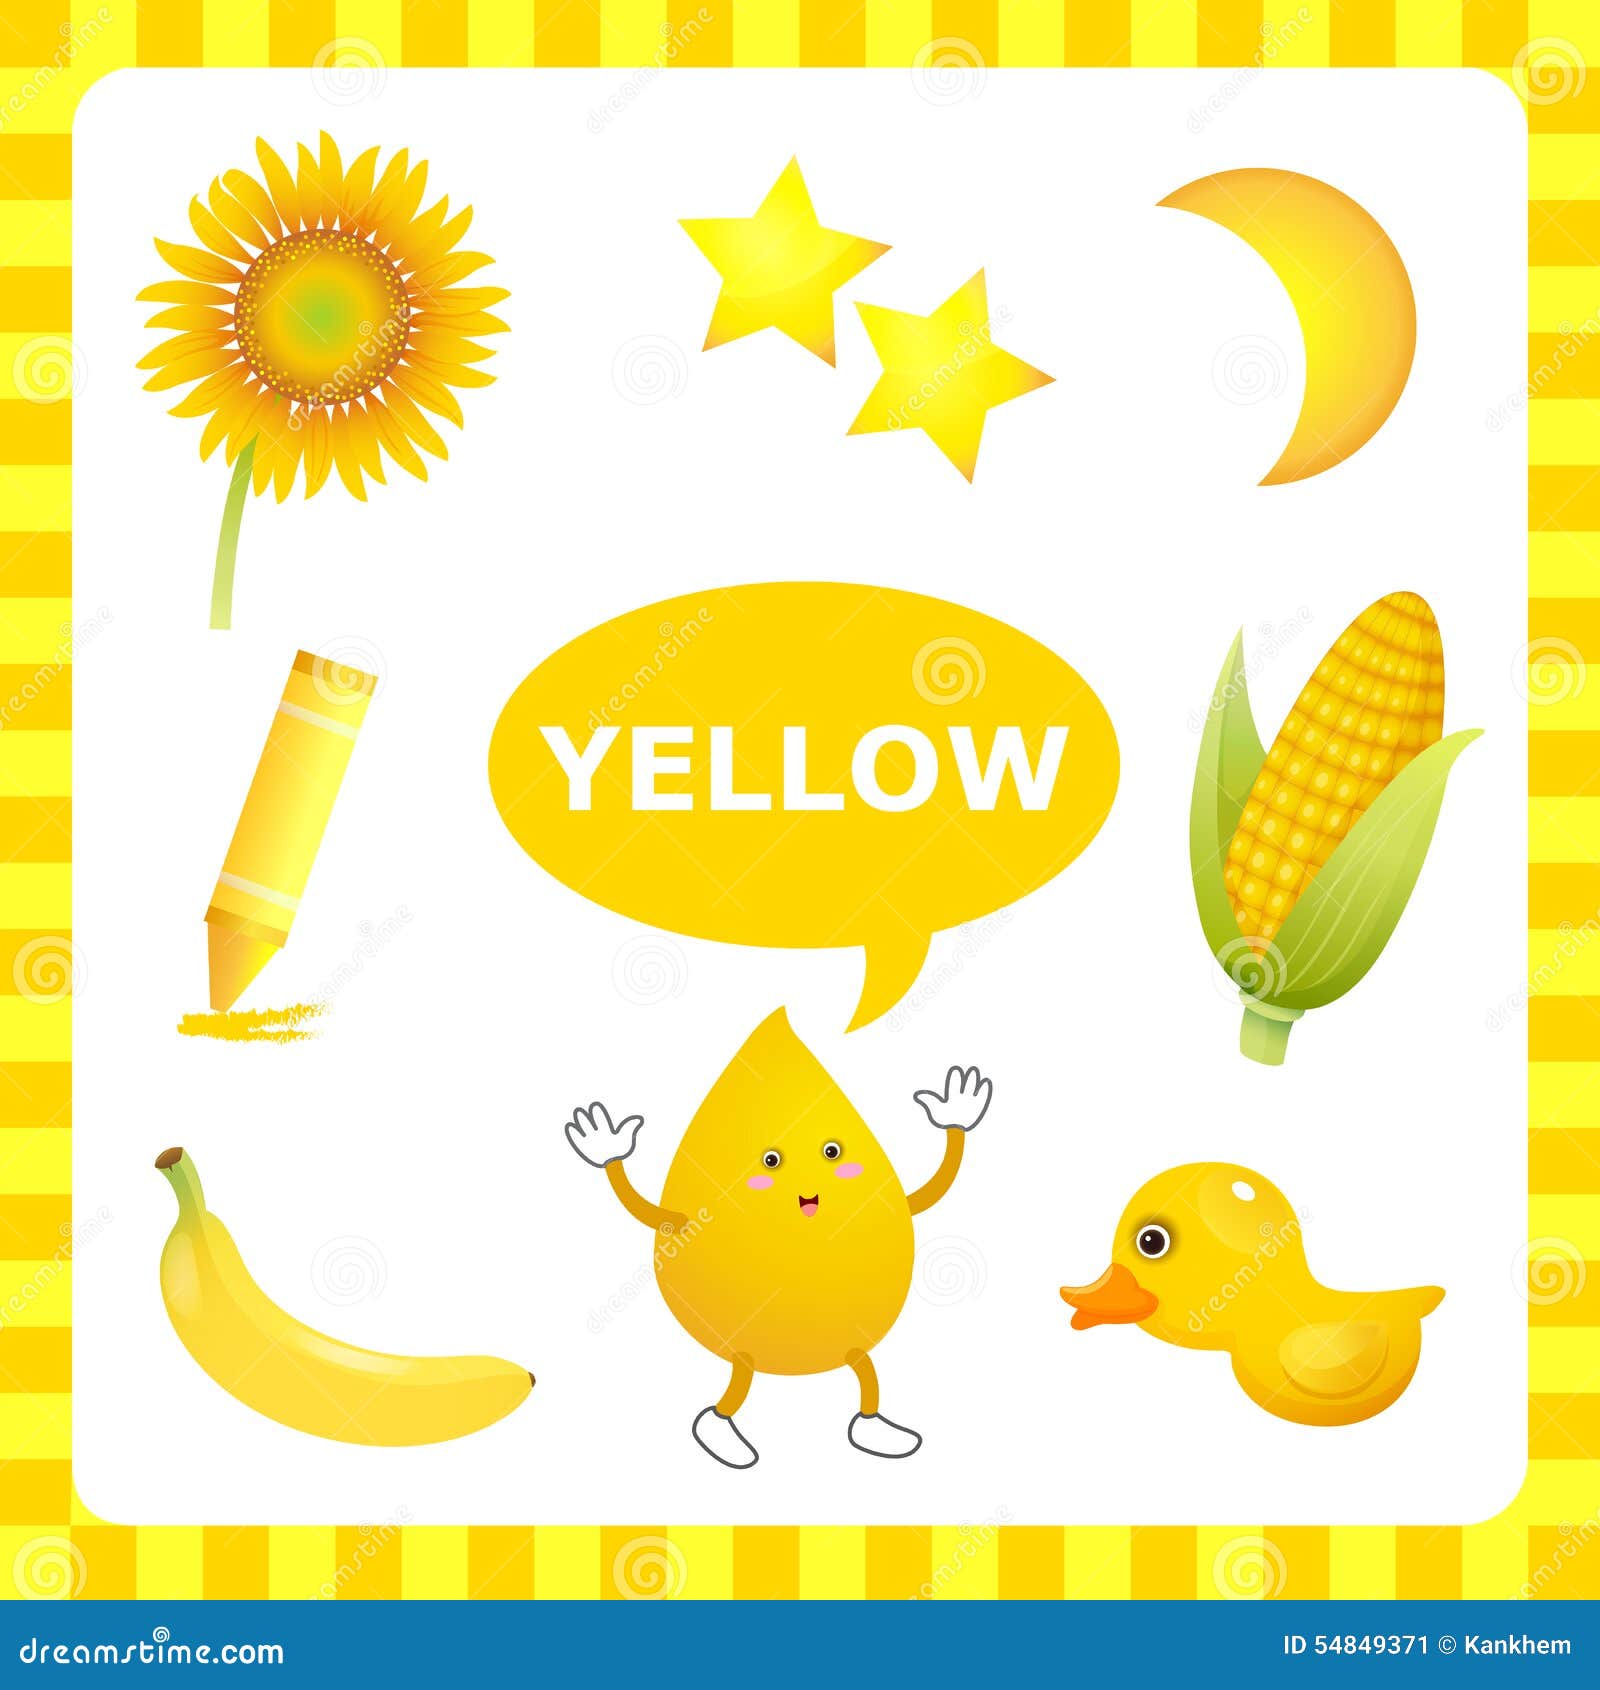 clipart yellow things - photo #5